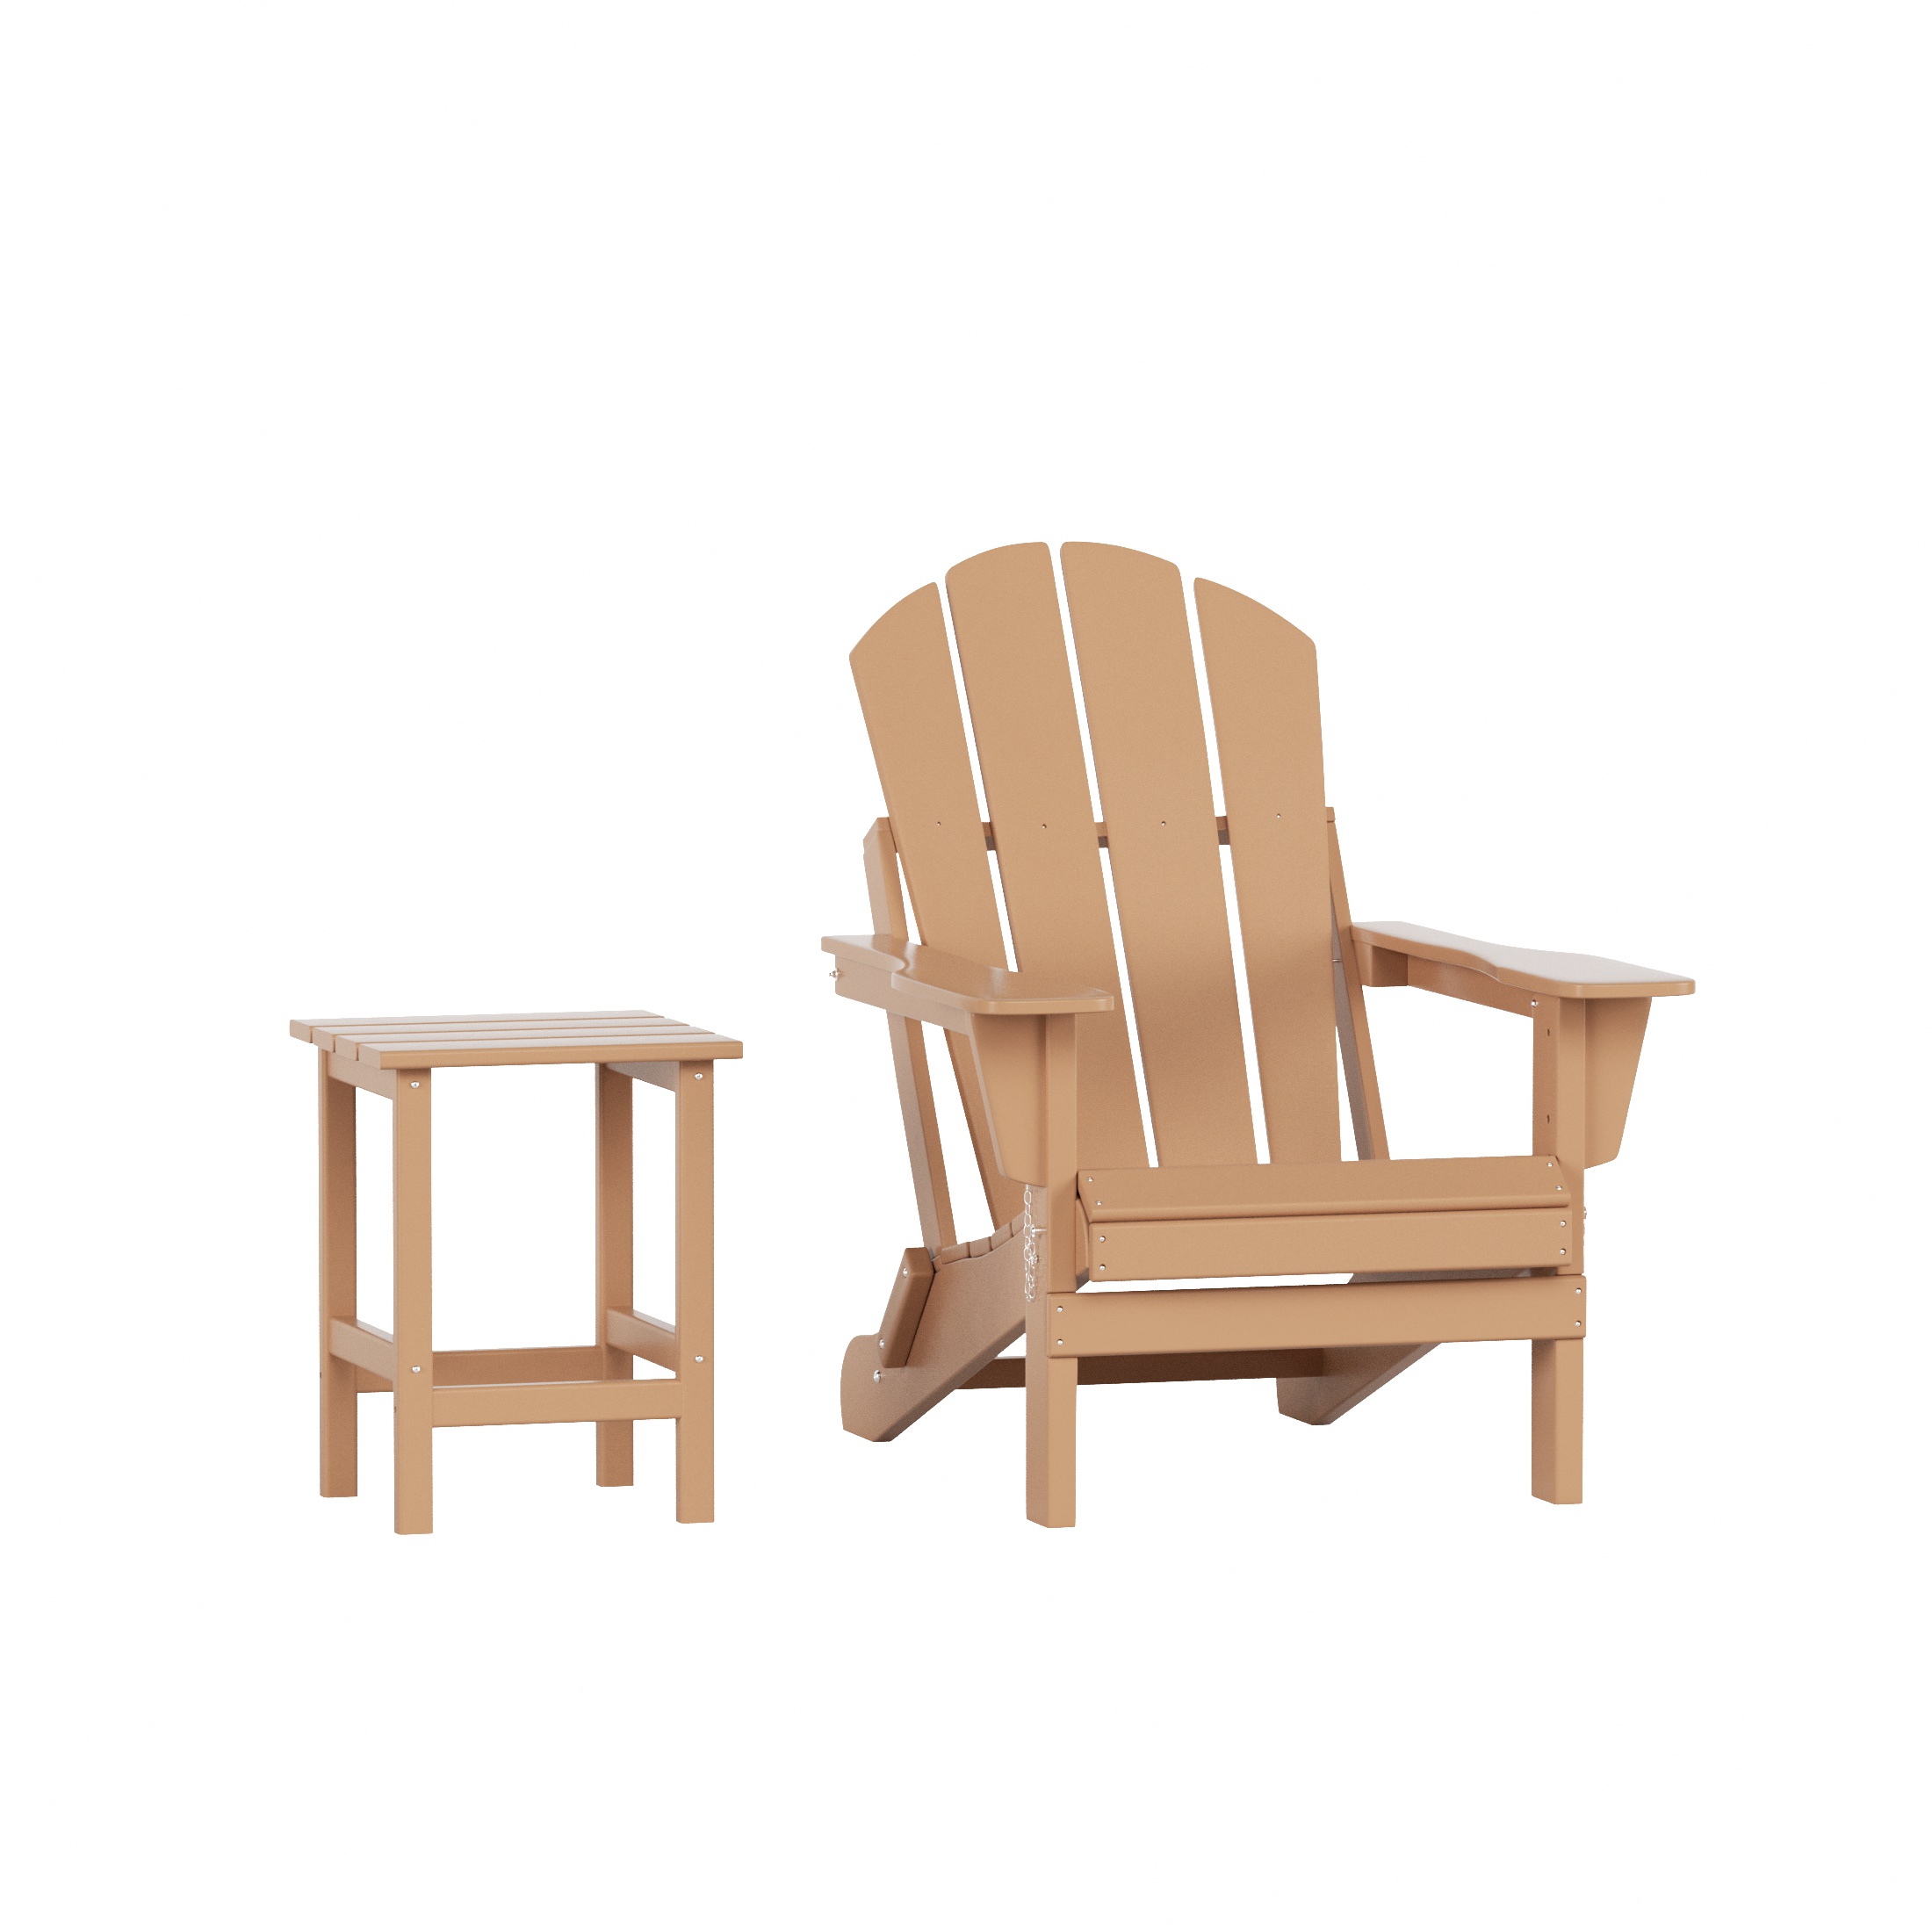 WestinTrends Malibu 2-Pieces Adirondack Chair Set with Side Table, All Weather Outdoor Seating Plastic Patio Lawn Chair Folding for Outside Porch Deck Backyard, Teak - image 1 of 7